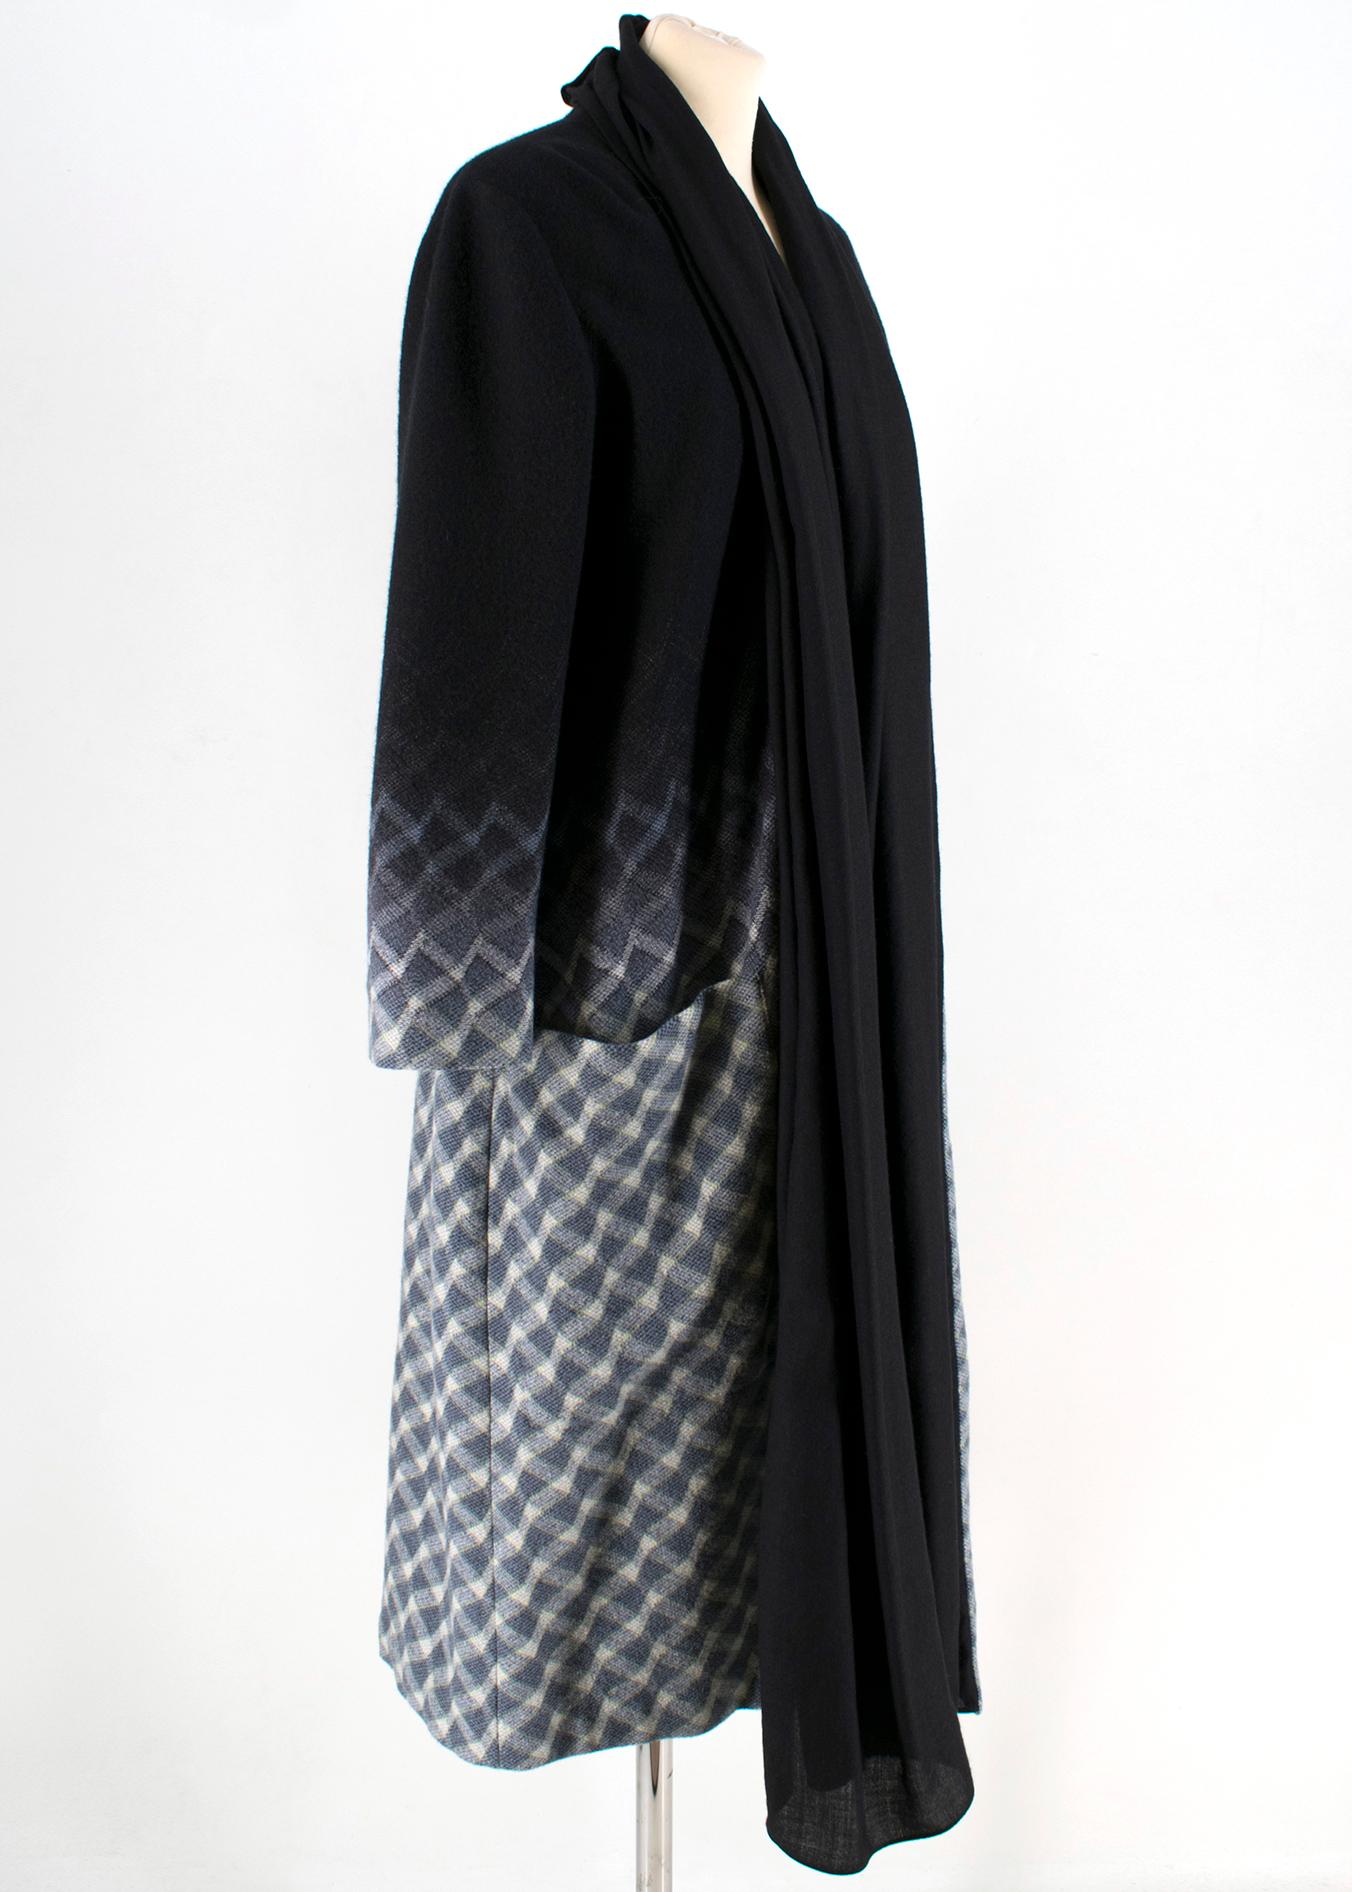 Missoni Wool Black & Grey Ombre Shawl Lapel Coat

- black and grey gradient coat
- extended silk trim and collar
- lined
- no fastening
- slip pockets

Please note, these items are pre-owned and may show some signs of storage, even when unworn and